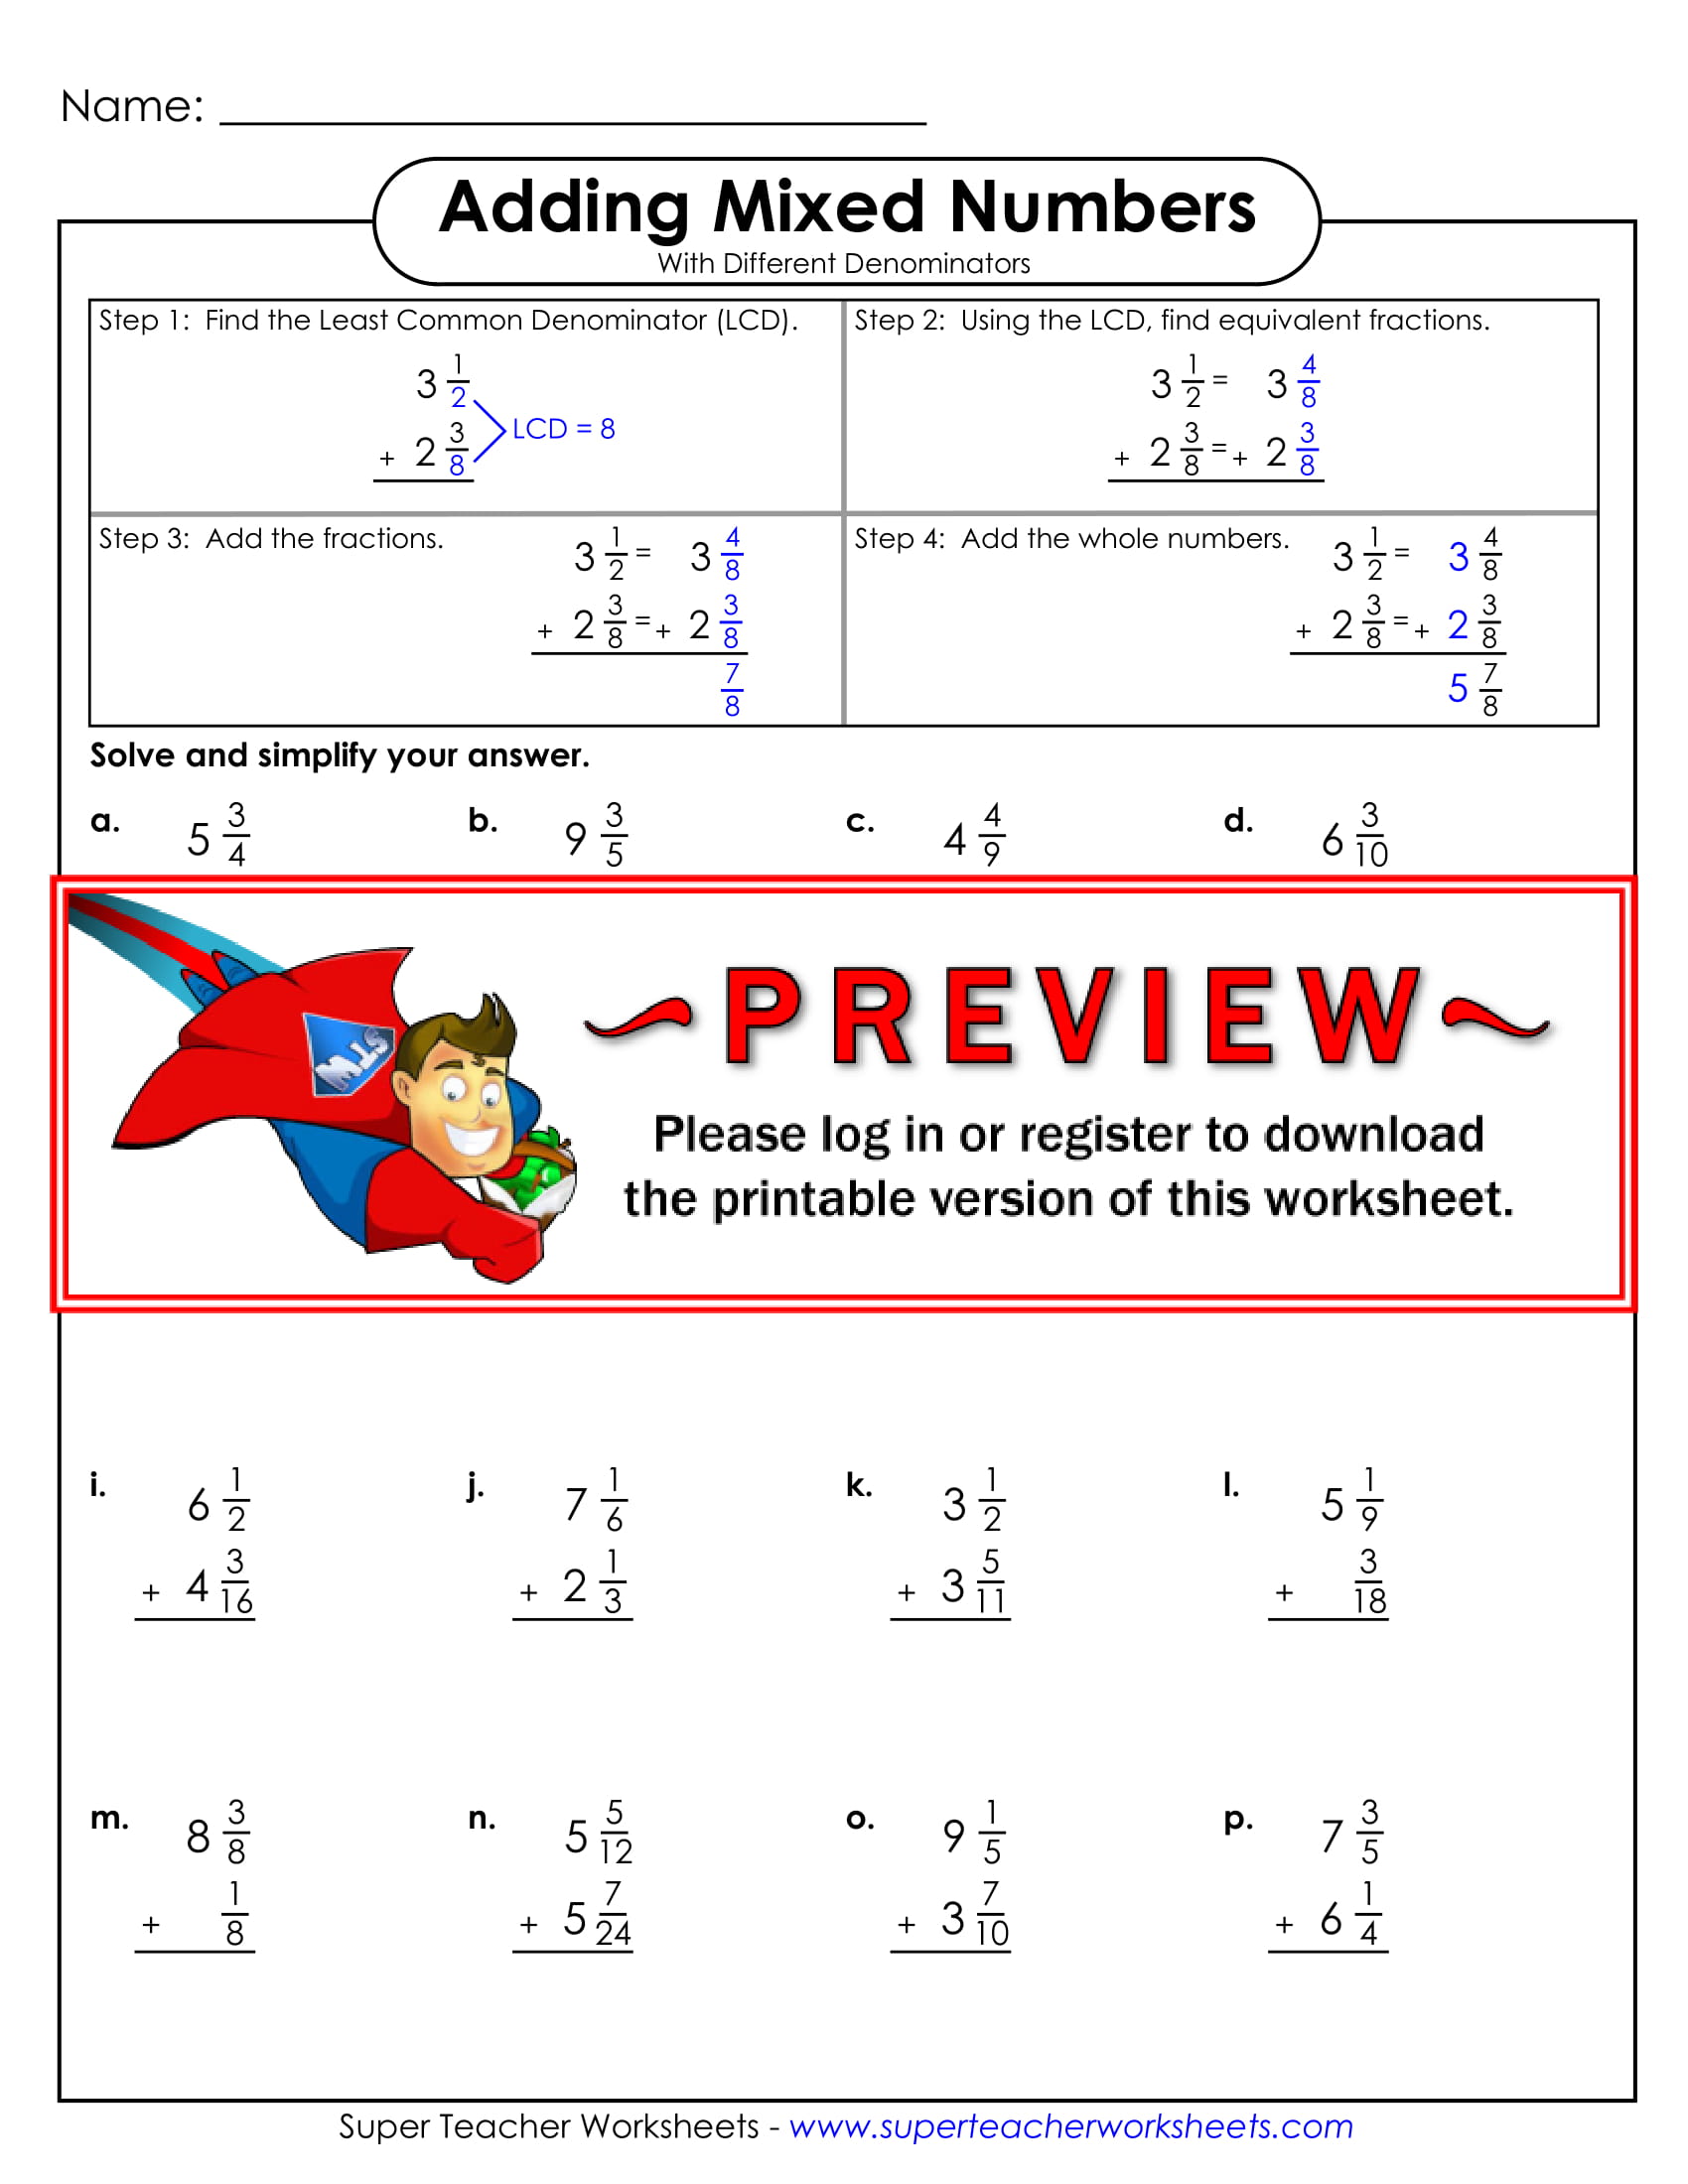 add-mixed-numbers-worksheet